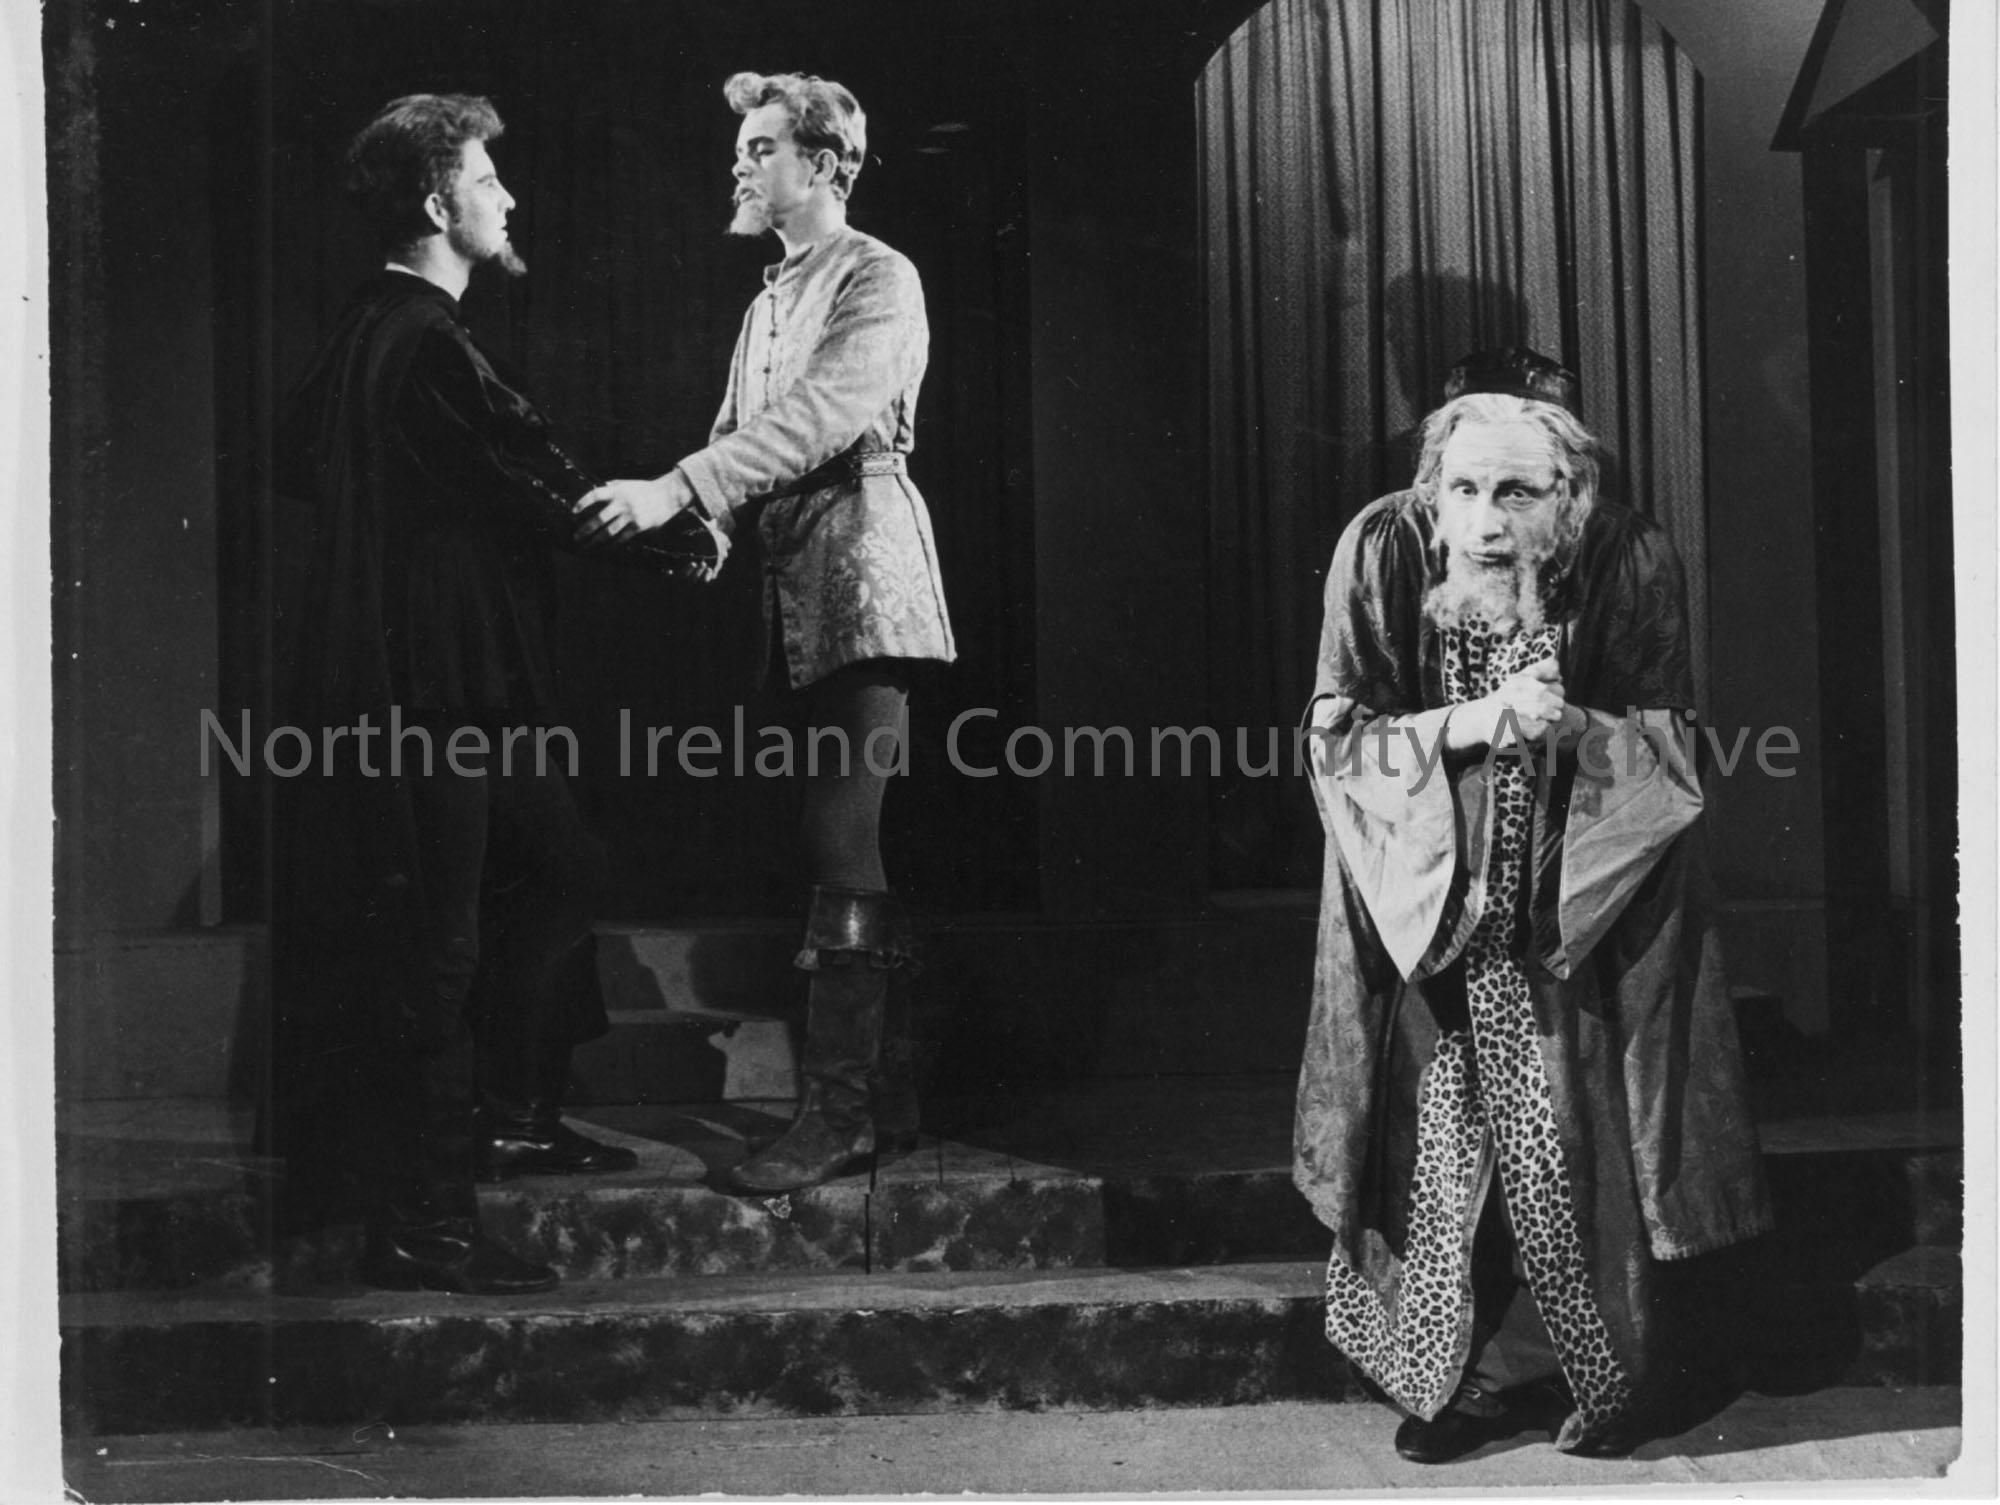 black and white photograph of a Dalriada School play